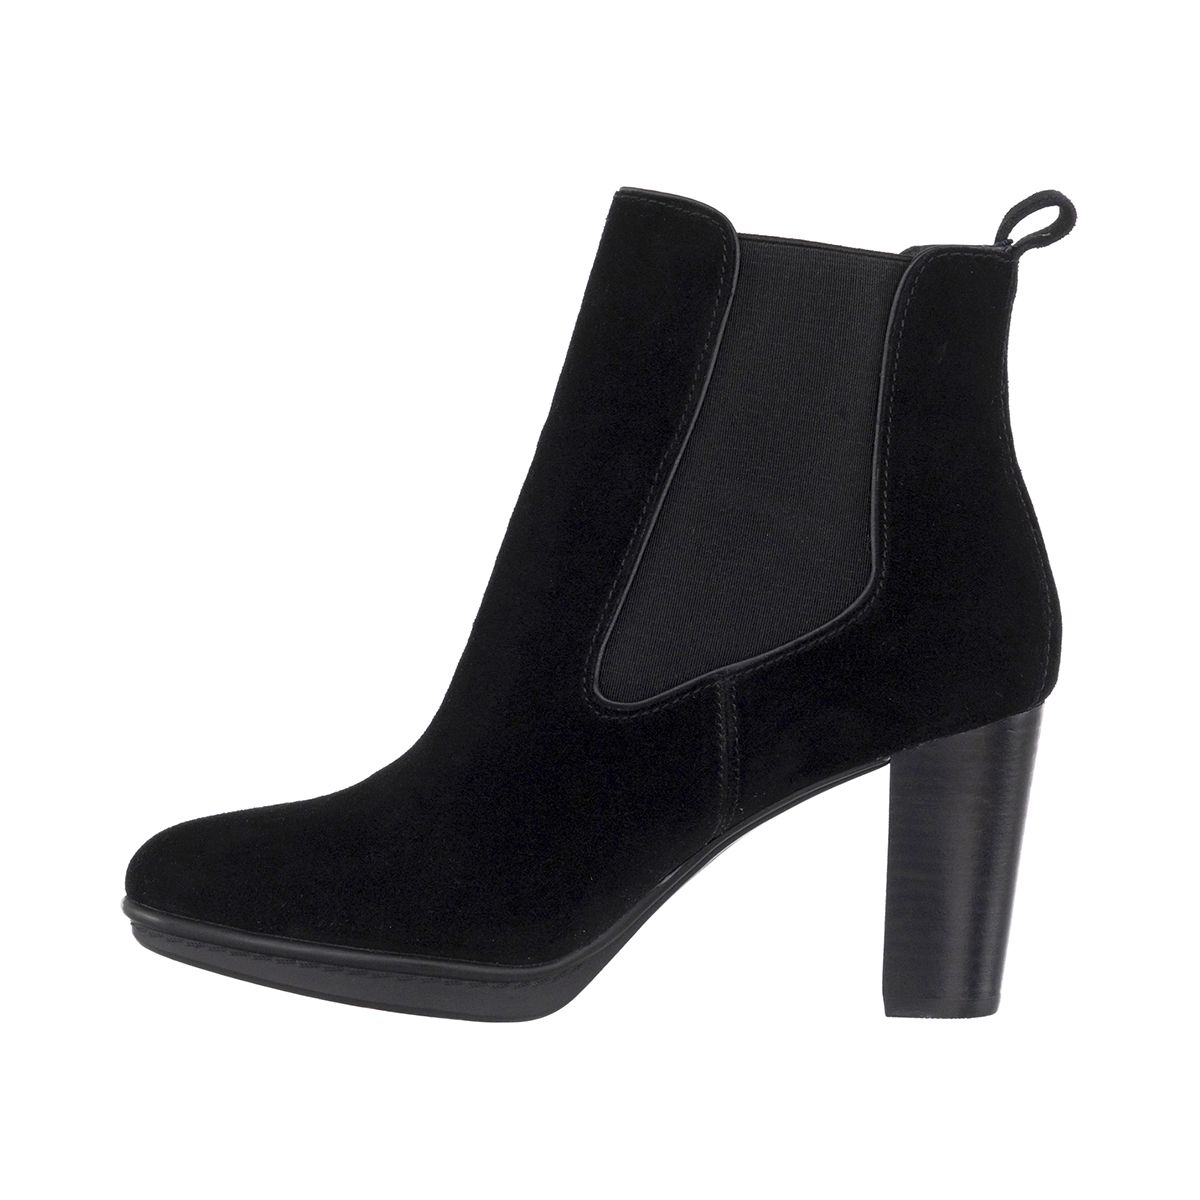 Tommy Hilfiger FW0FW03574-990-41 You can never go wrong with a pair of black ankle boots, especially if they have a heel like this one that will elongate your figure. Regular fit and made of suede.